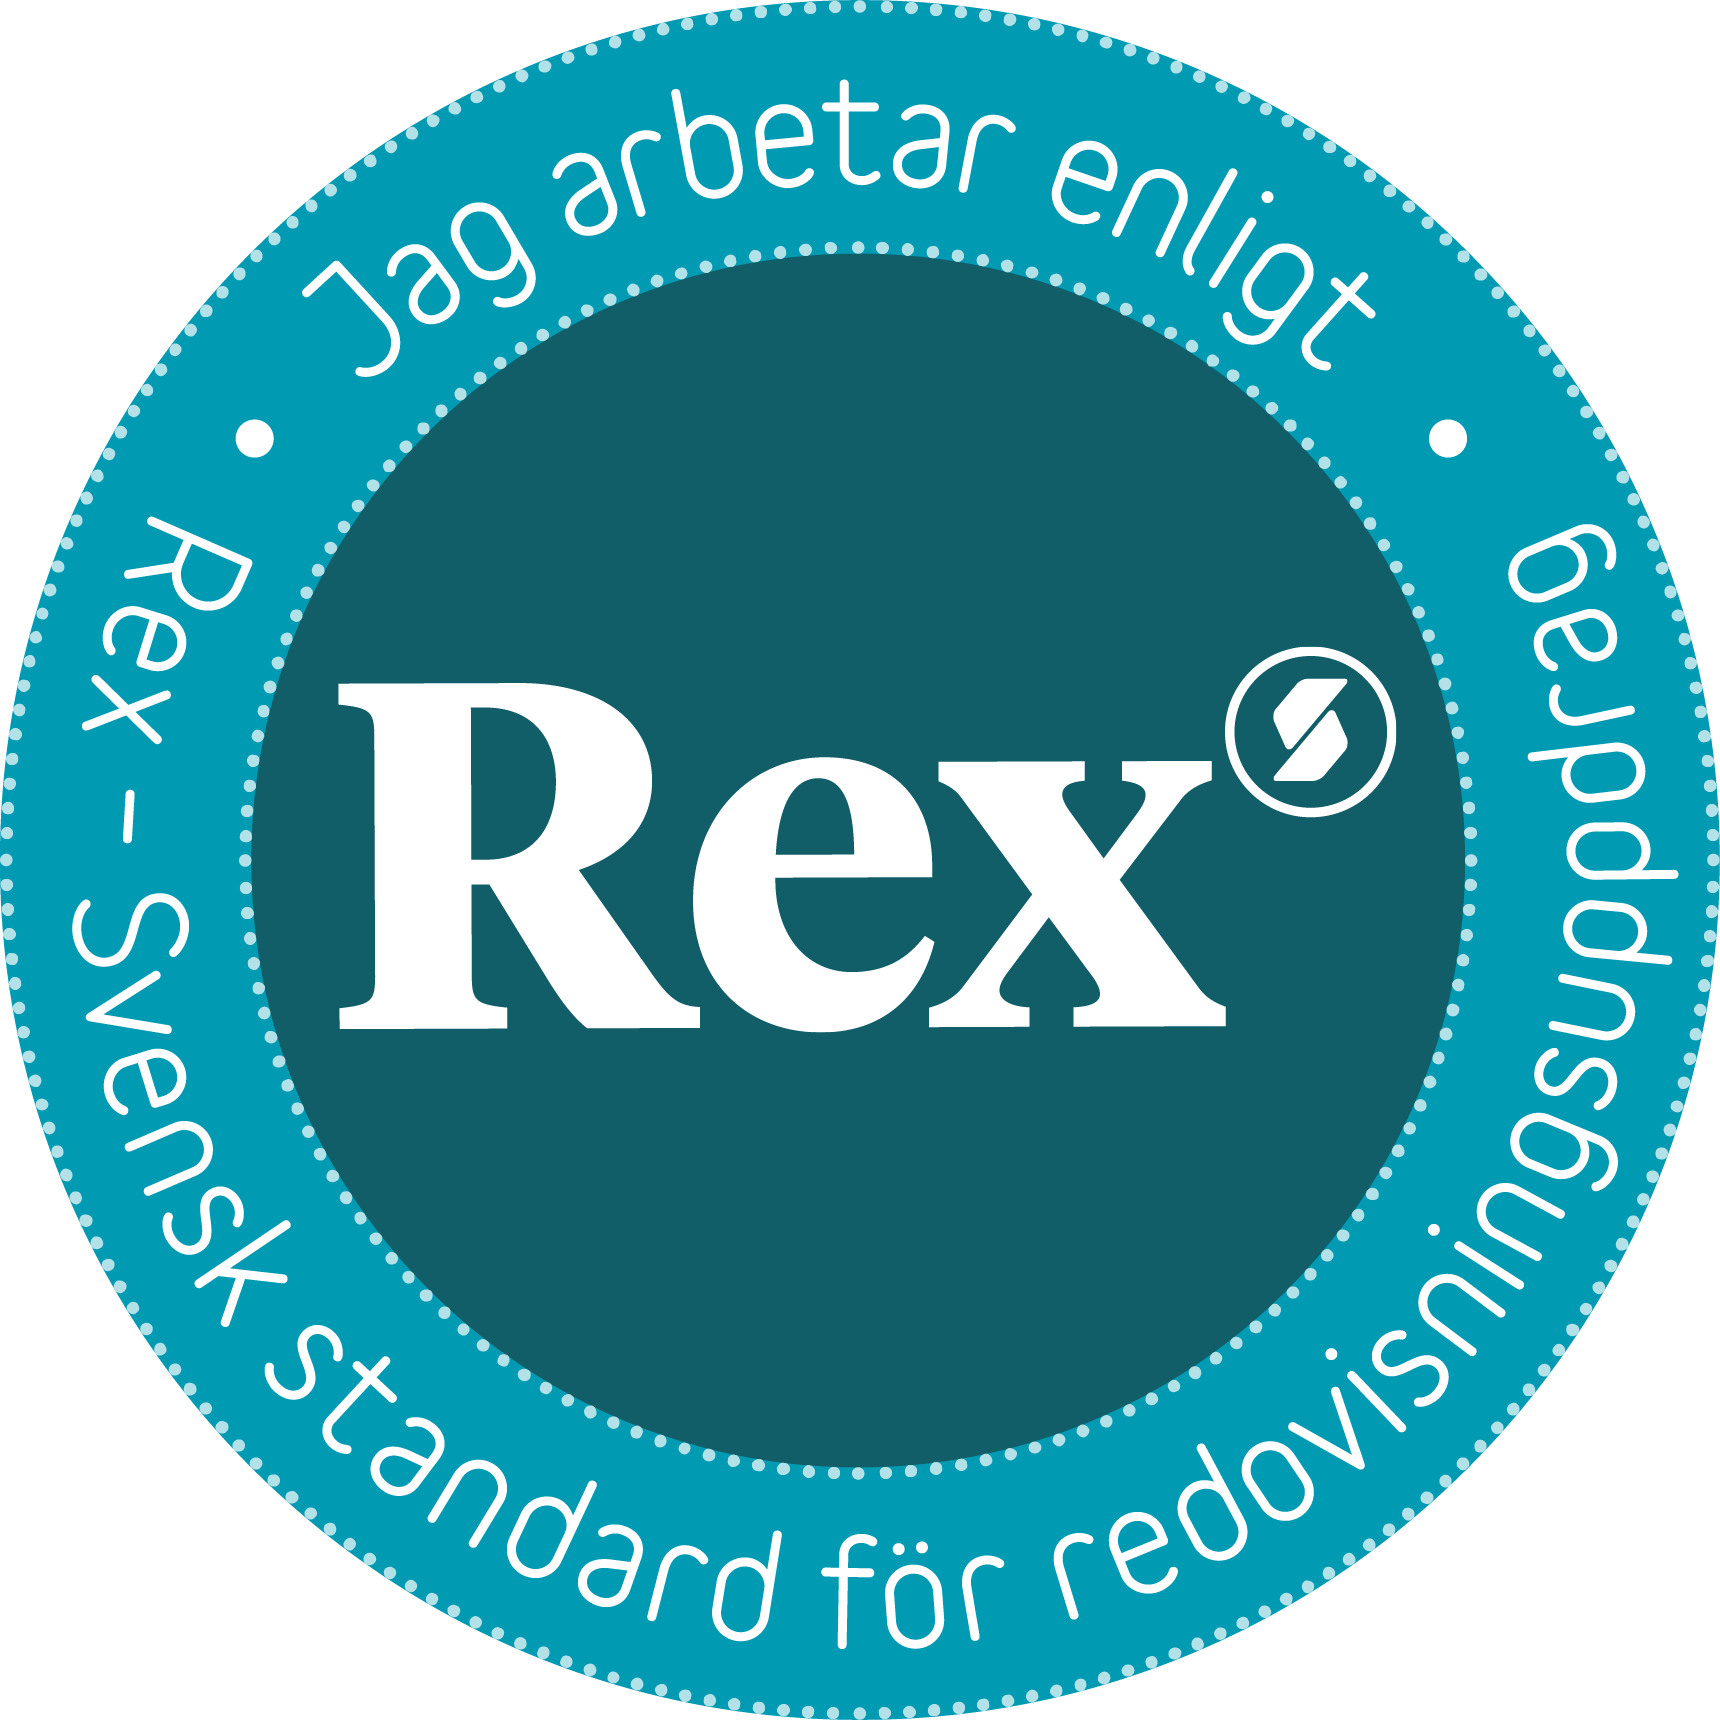 A sigil from the Swedish Accountants Association that says 'I work according to REX, the Swedish standard for accountancy'